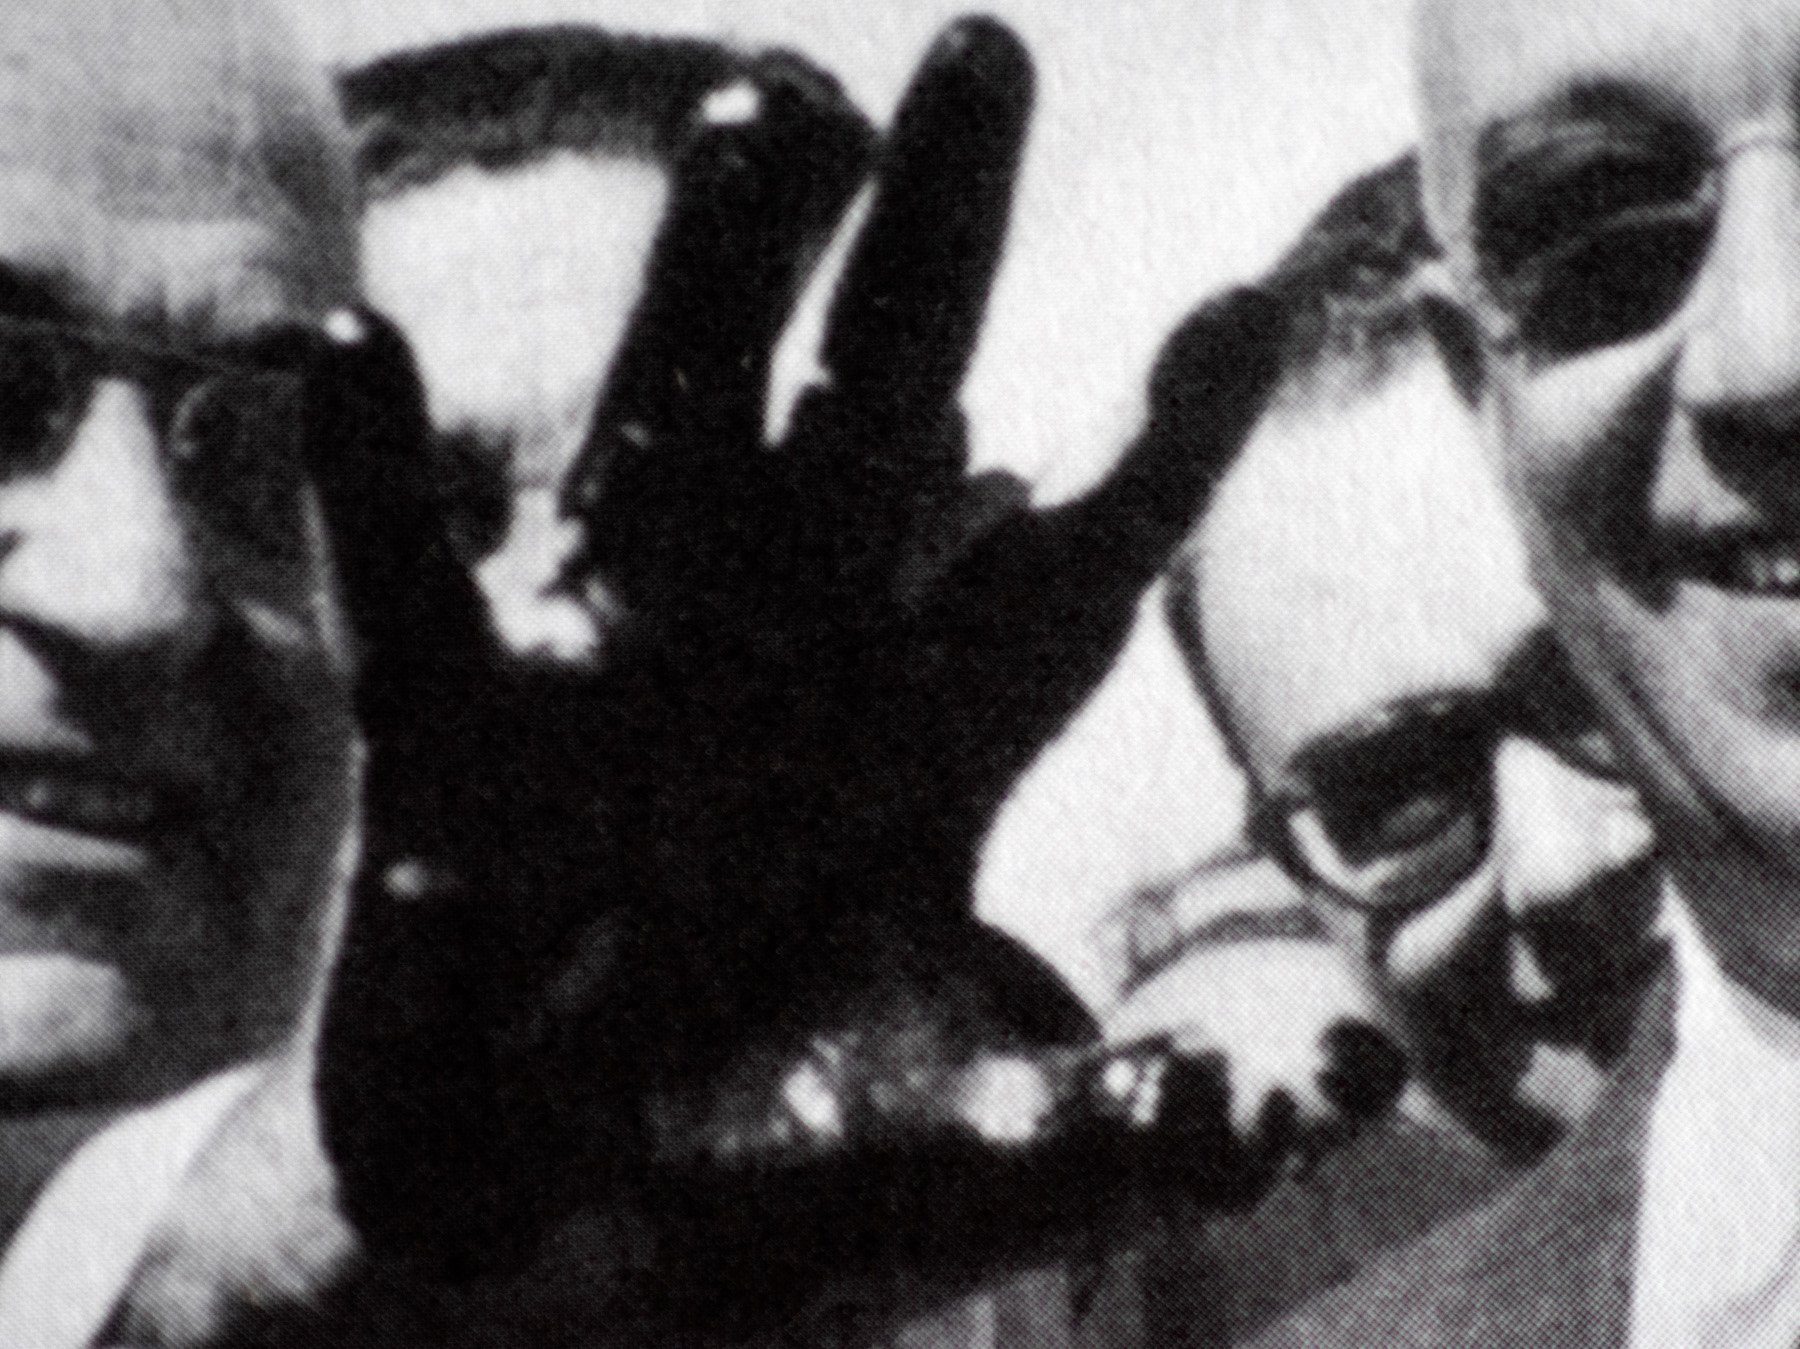  Candeias, Bahia, 2021. A detail from an archival picture of Brazilian President Getulio Vargas showing a hand stained with oil at the opening of the construction works of the Landulpho Alves Refinery. The refinery is located in front of the Ilha da 